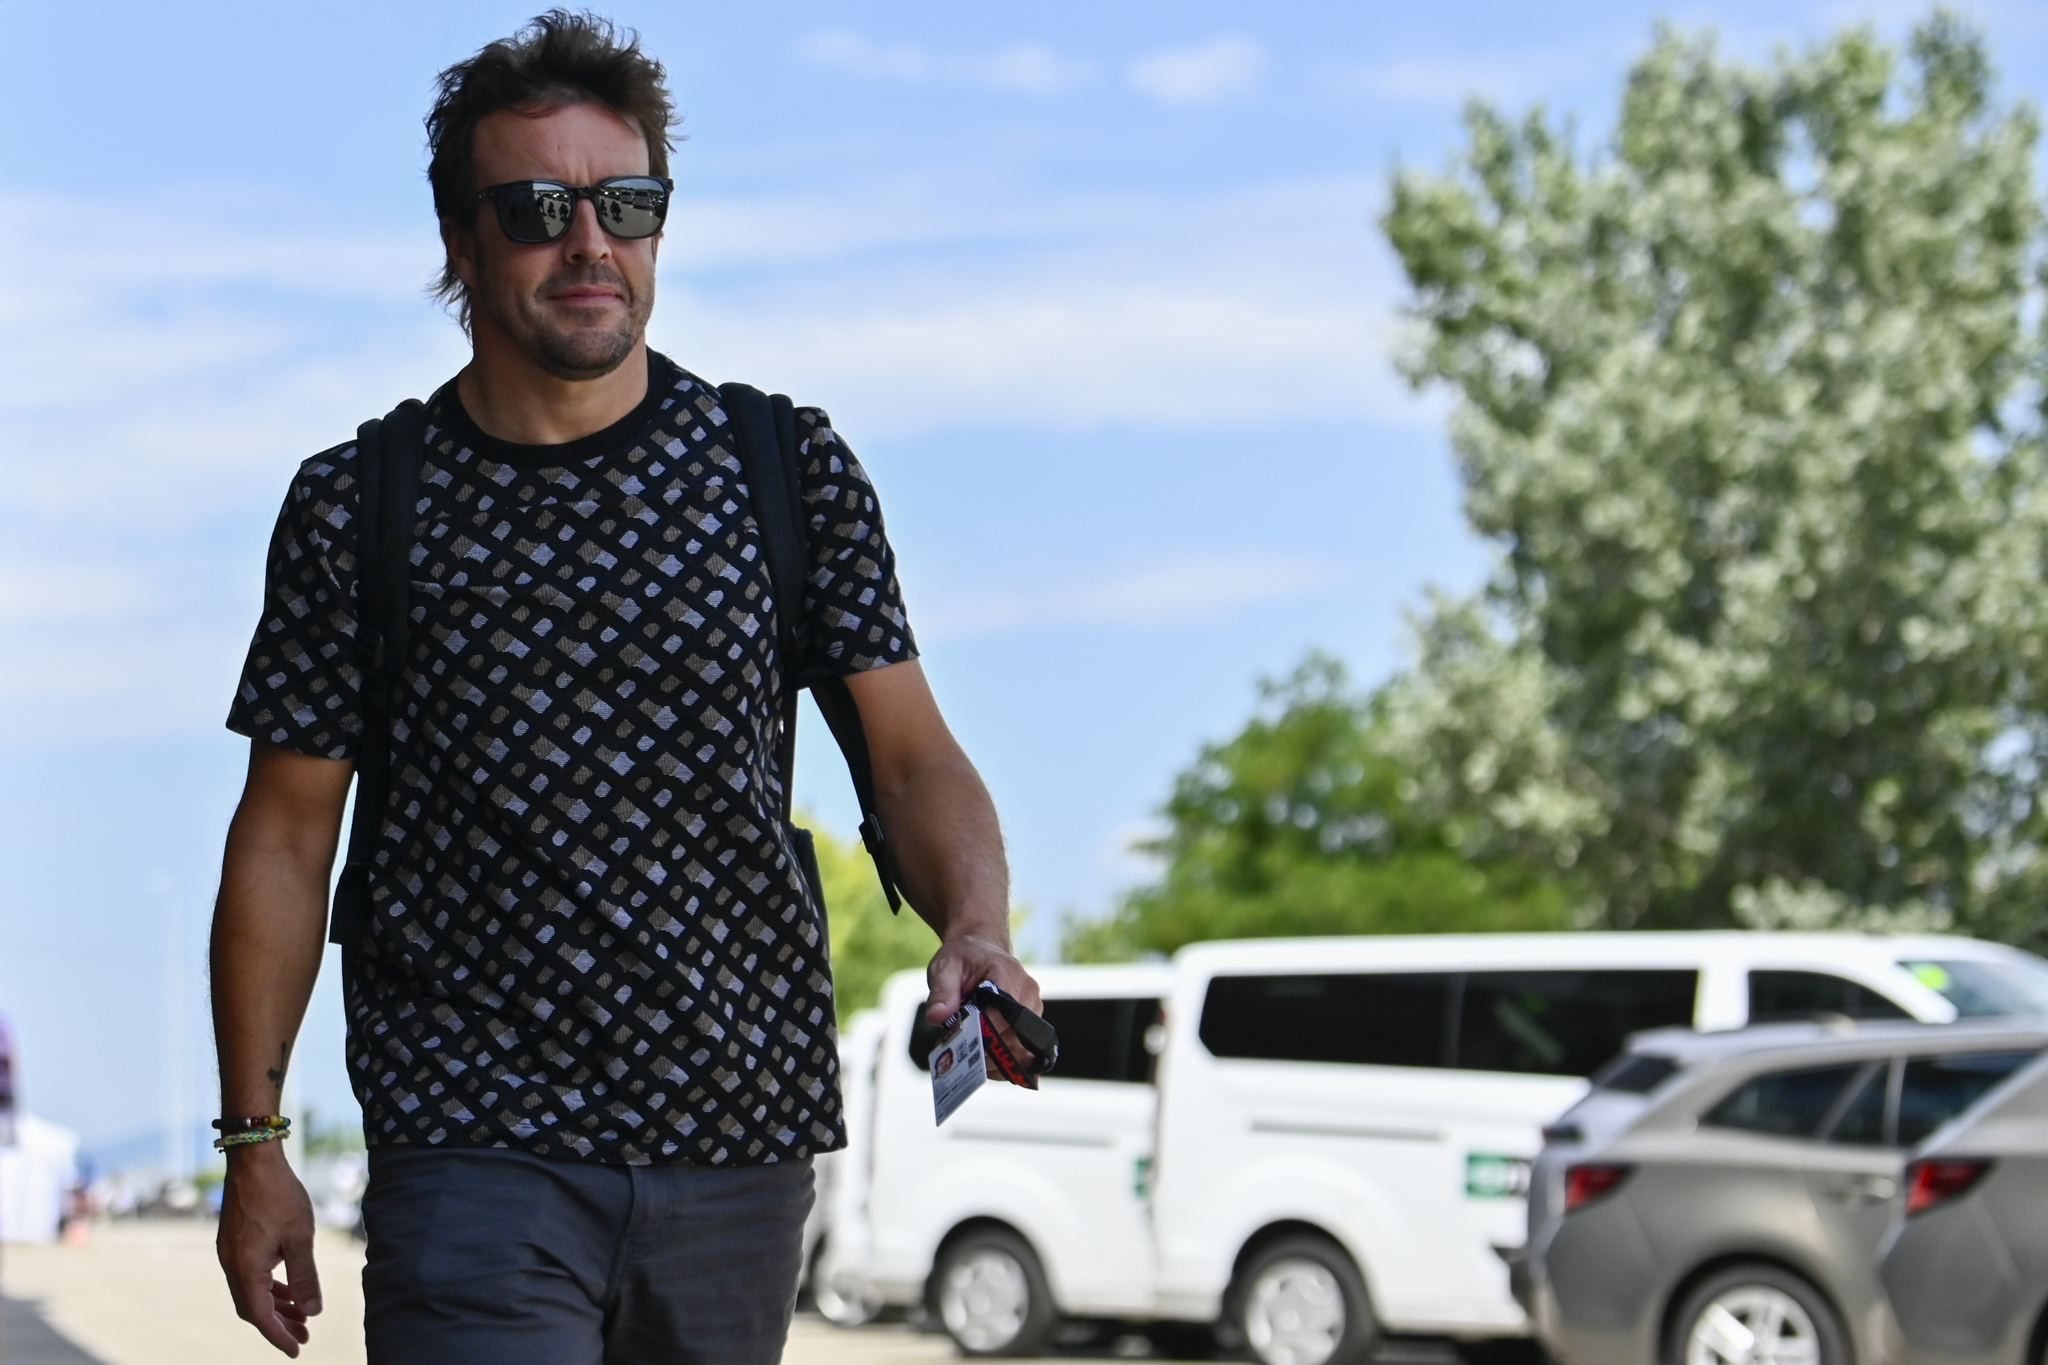 Spanish Formula One driver Fernando lt;HIT gt;Alonso lt;/HIT gt; of Aston Martin arrives in the paddock ahead of the Hungarian Formula One Grand Prix at the Hungaroring racetrack in Mogyorod, near Budapest, Hungary, Thursday, July 20, 2023. The Hungarian F1 Grand Prix is held on Sunday, July 23, 2023. (AP Photo/Denes Erdos)